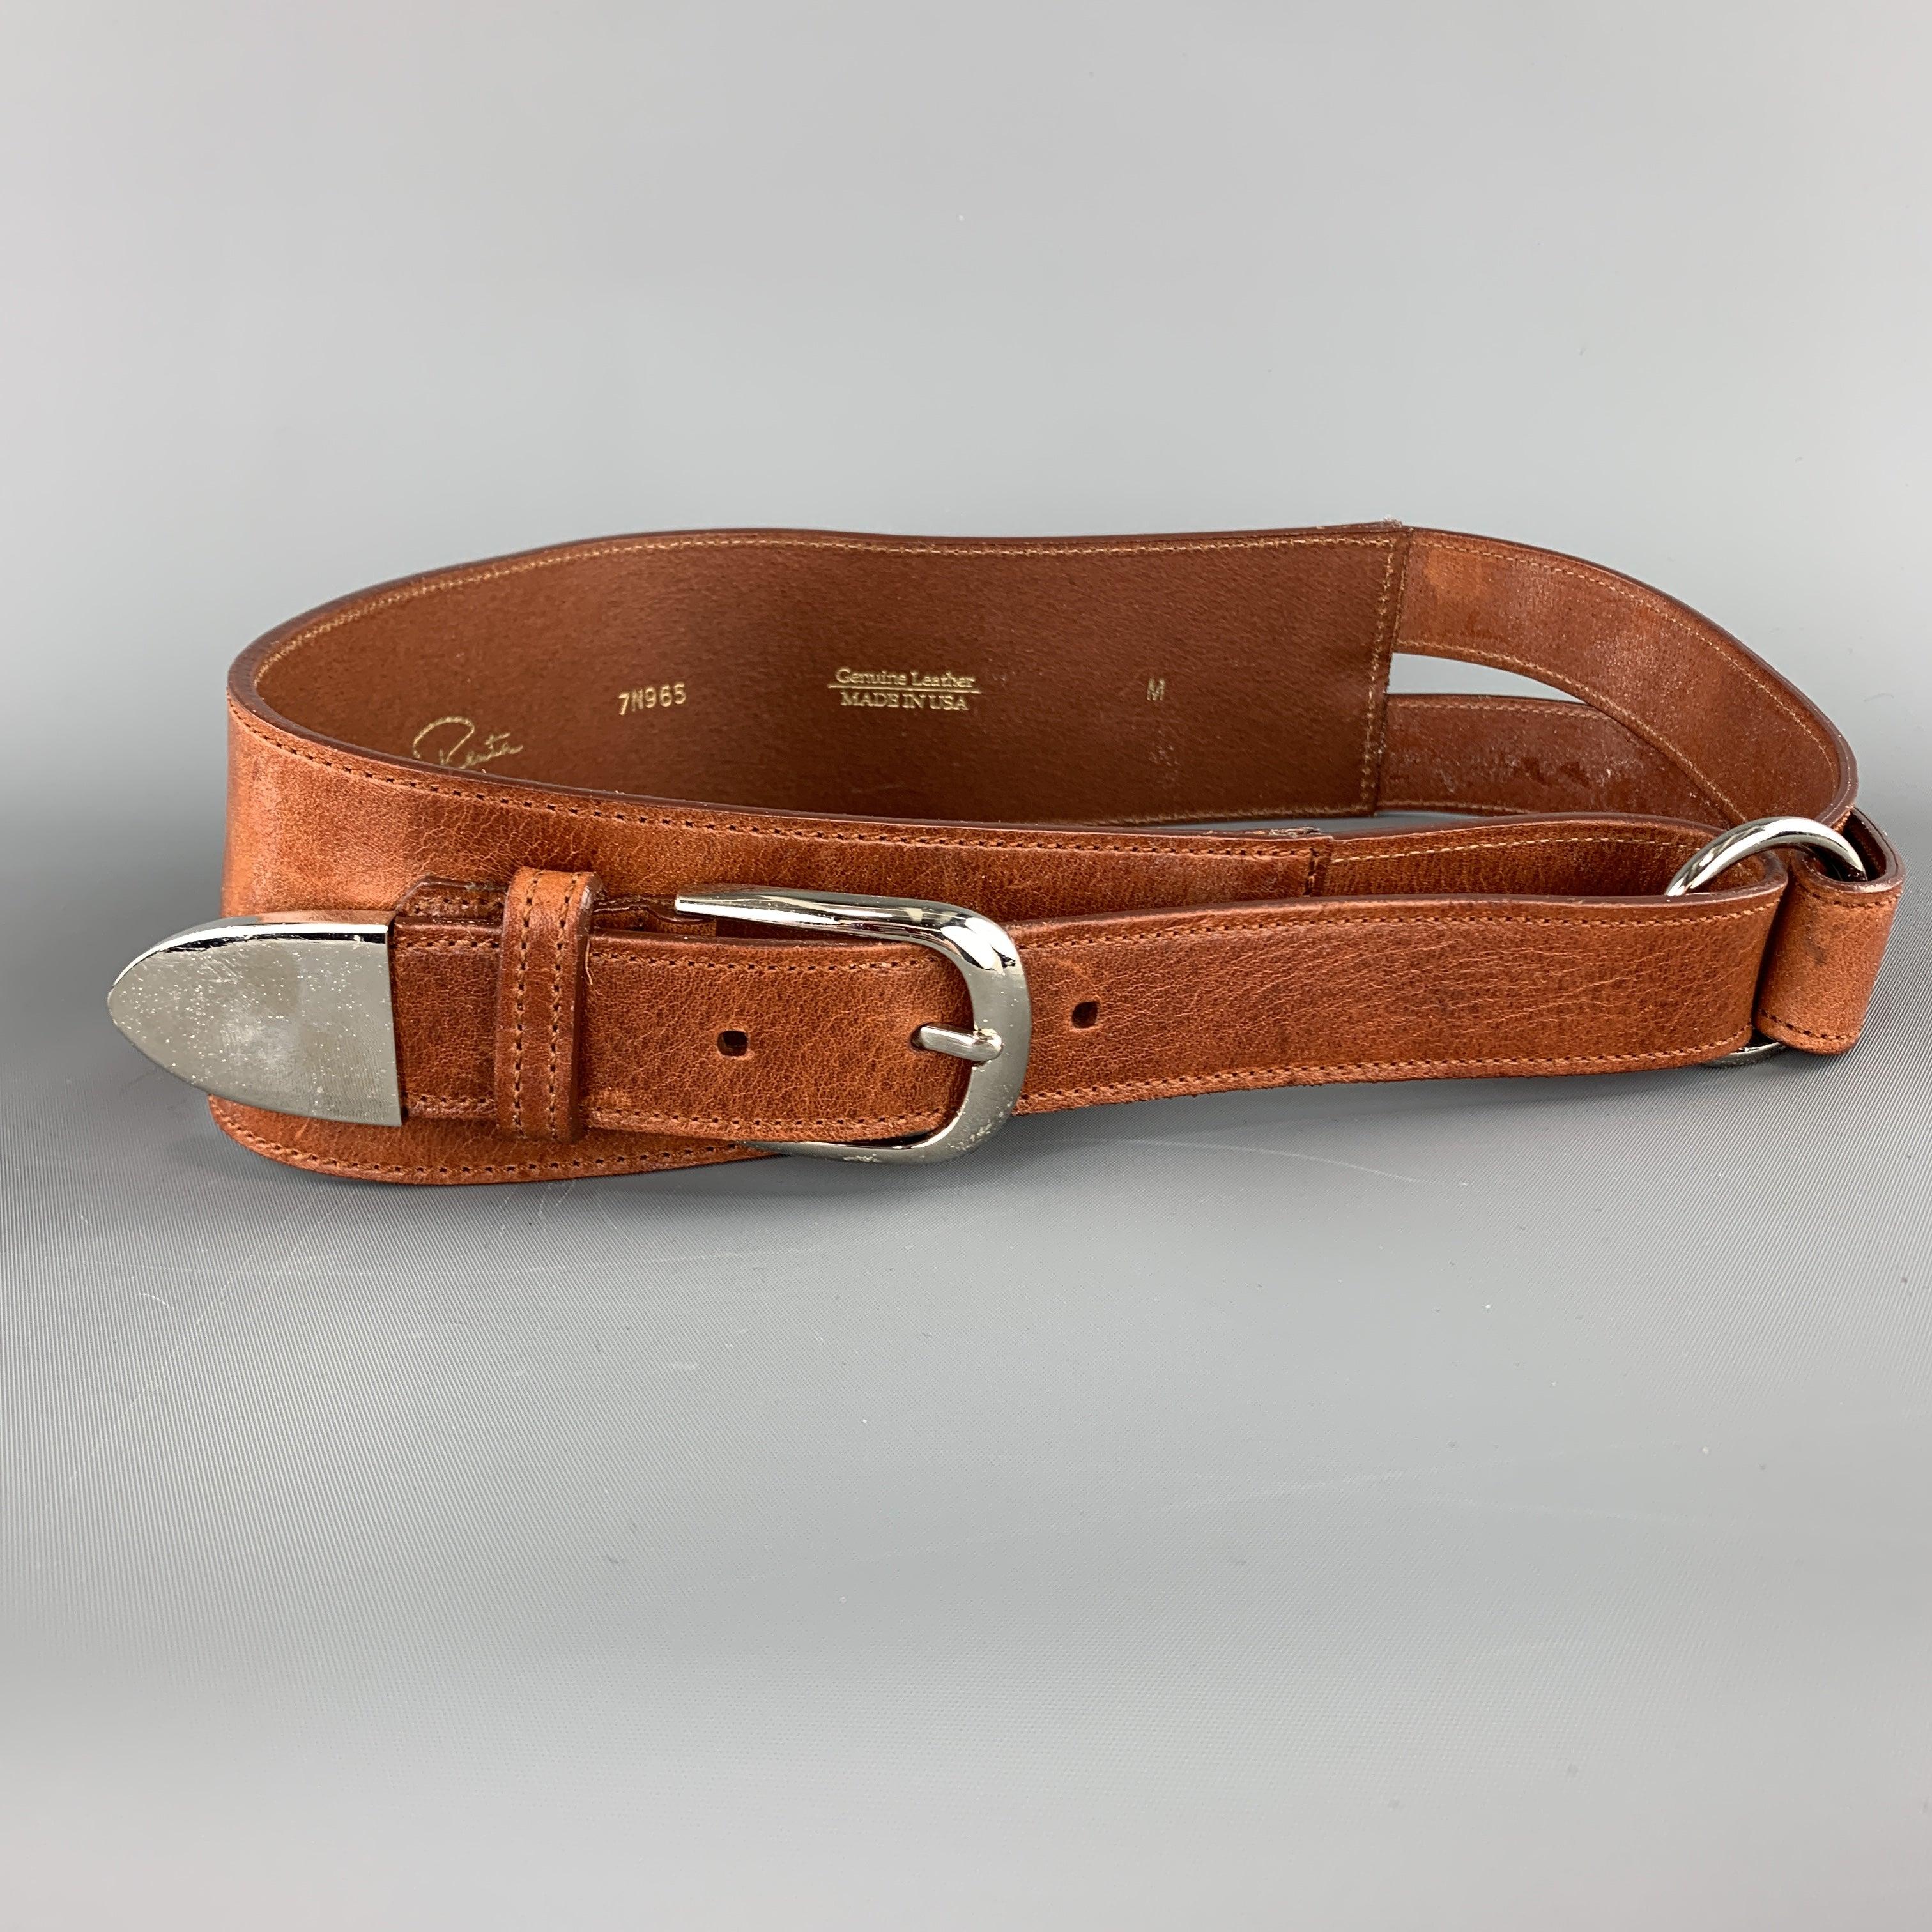 OSCAR DE LA RENTA belt comes in tan leather with a loop buckle wrap closure accented with silver tone hardware. Minor wear. Made in USA.
Good
Pre-Owned Condition. 

Marked:   MWidth: 3 inches Minimum Fit: 30 inches Maximum Fit: 32 inches 
  
  
